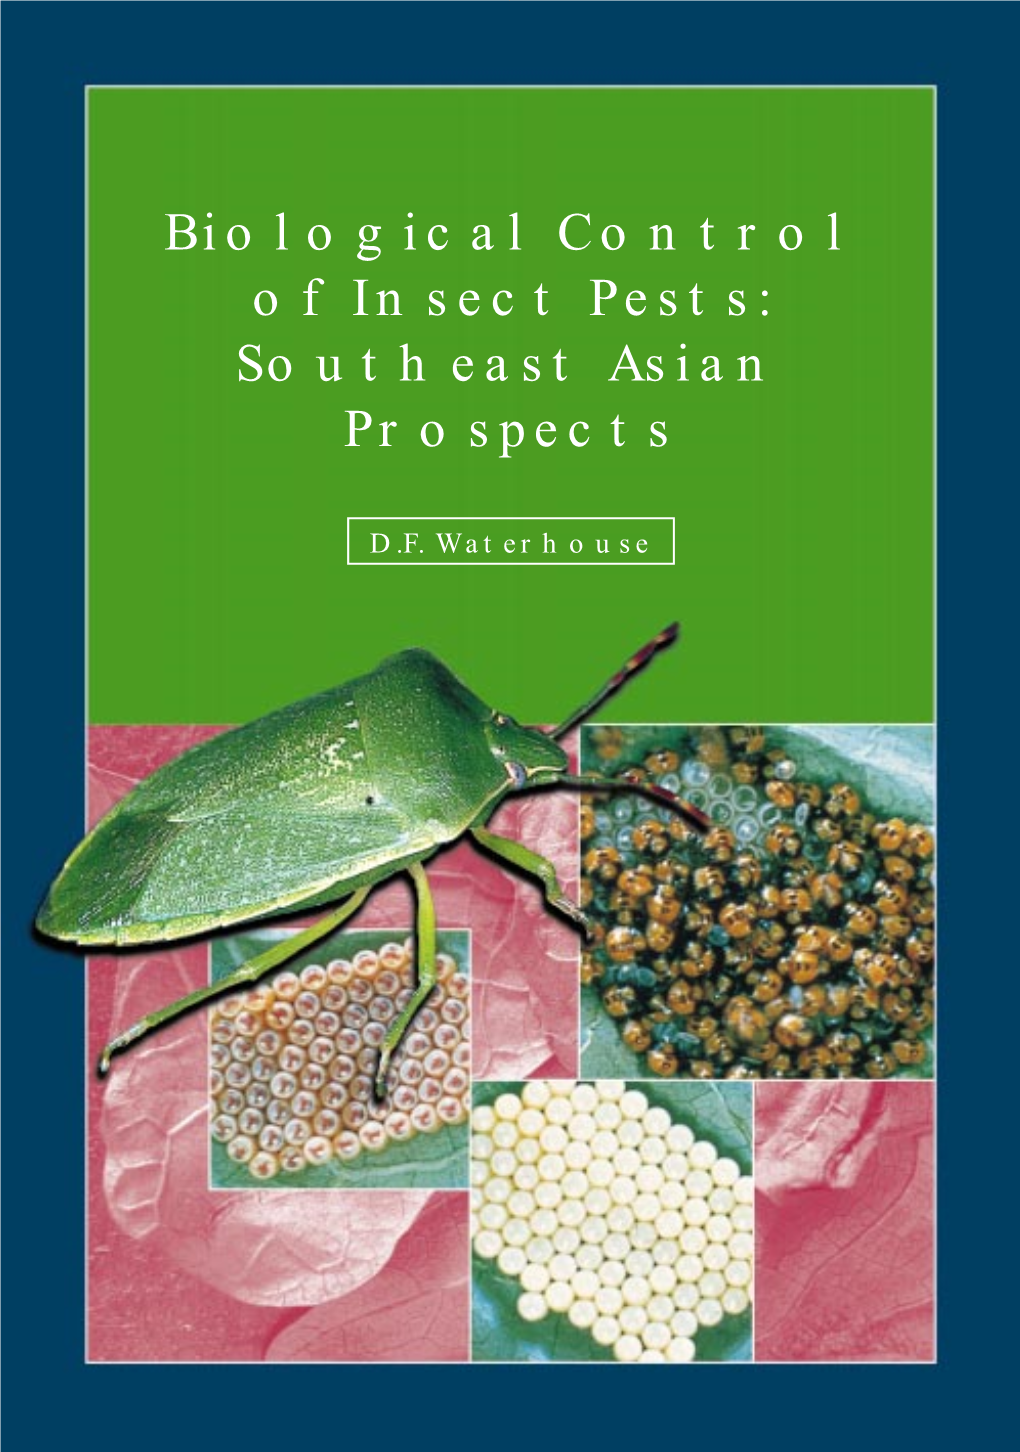 Biological Control of Insect Pests: Southeast Asian Prospects